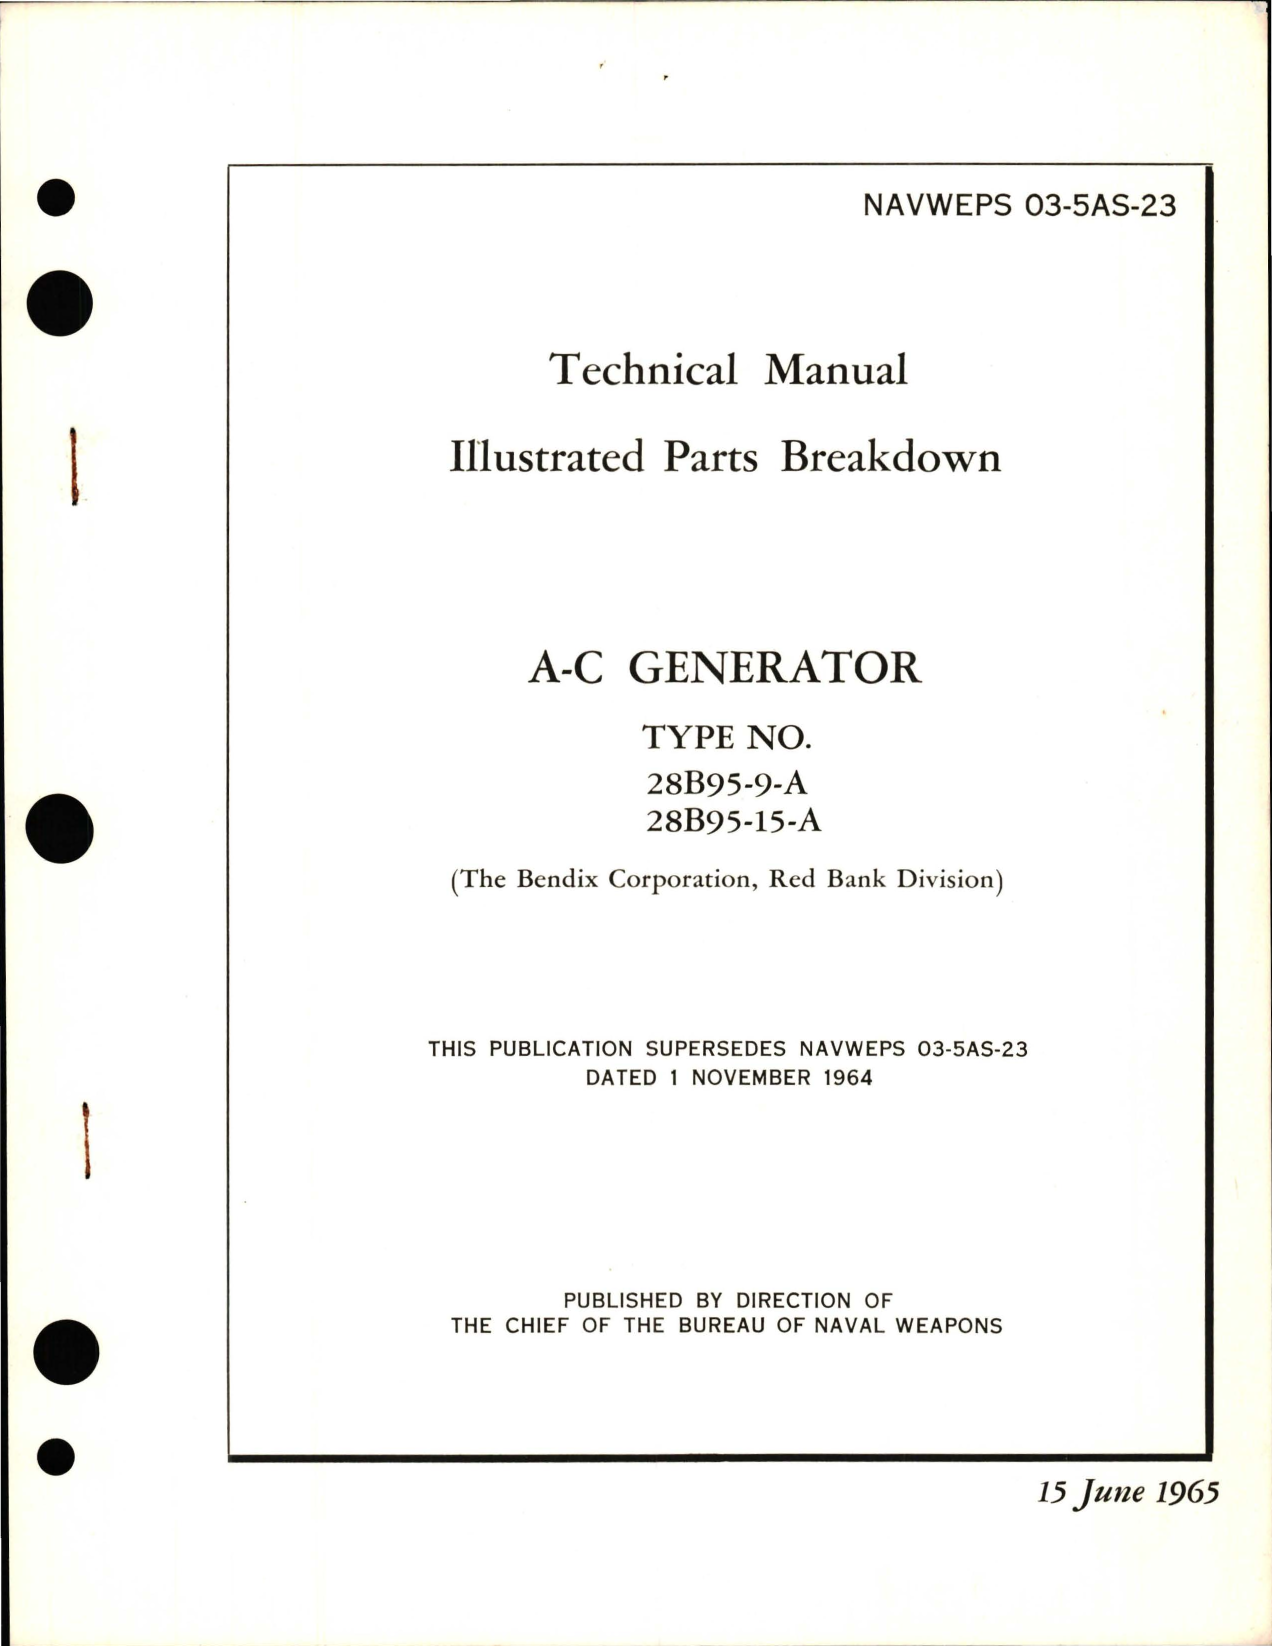 Sample page 1 from AirCorps Library document: Illustrated Parts Breakdown for A-C Generator - Types 28B95-9-A and 28B95-15-A